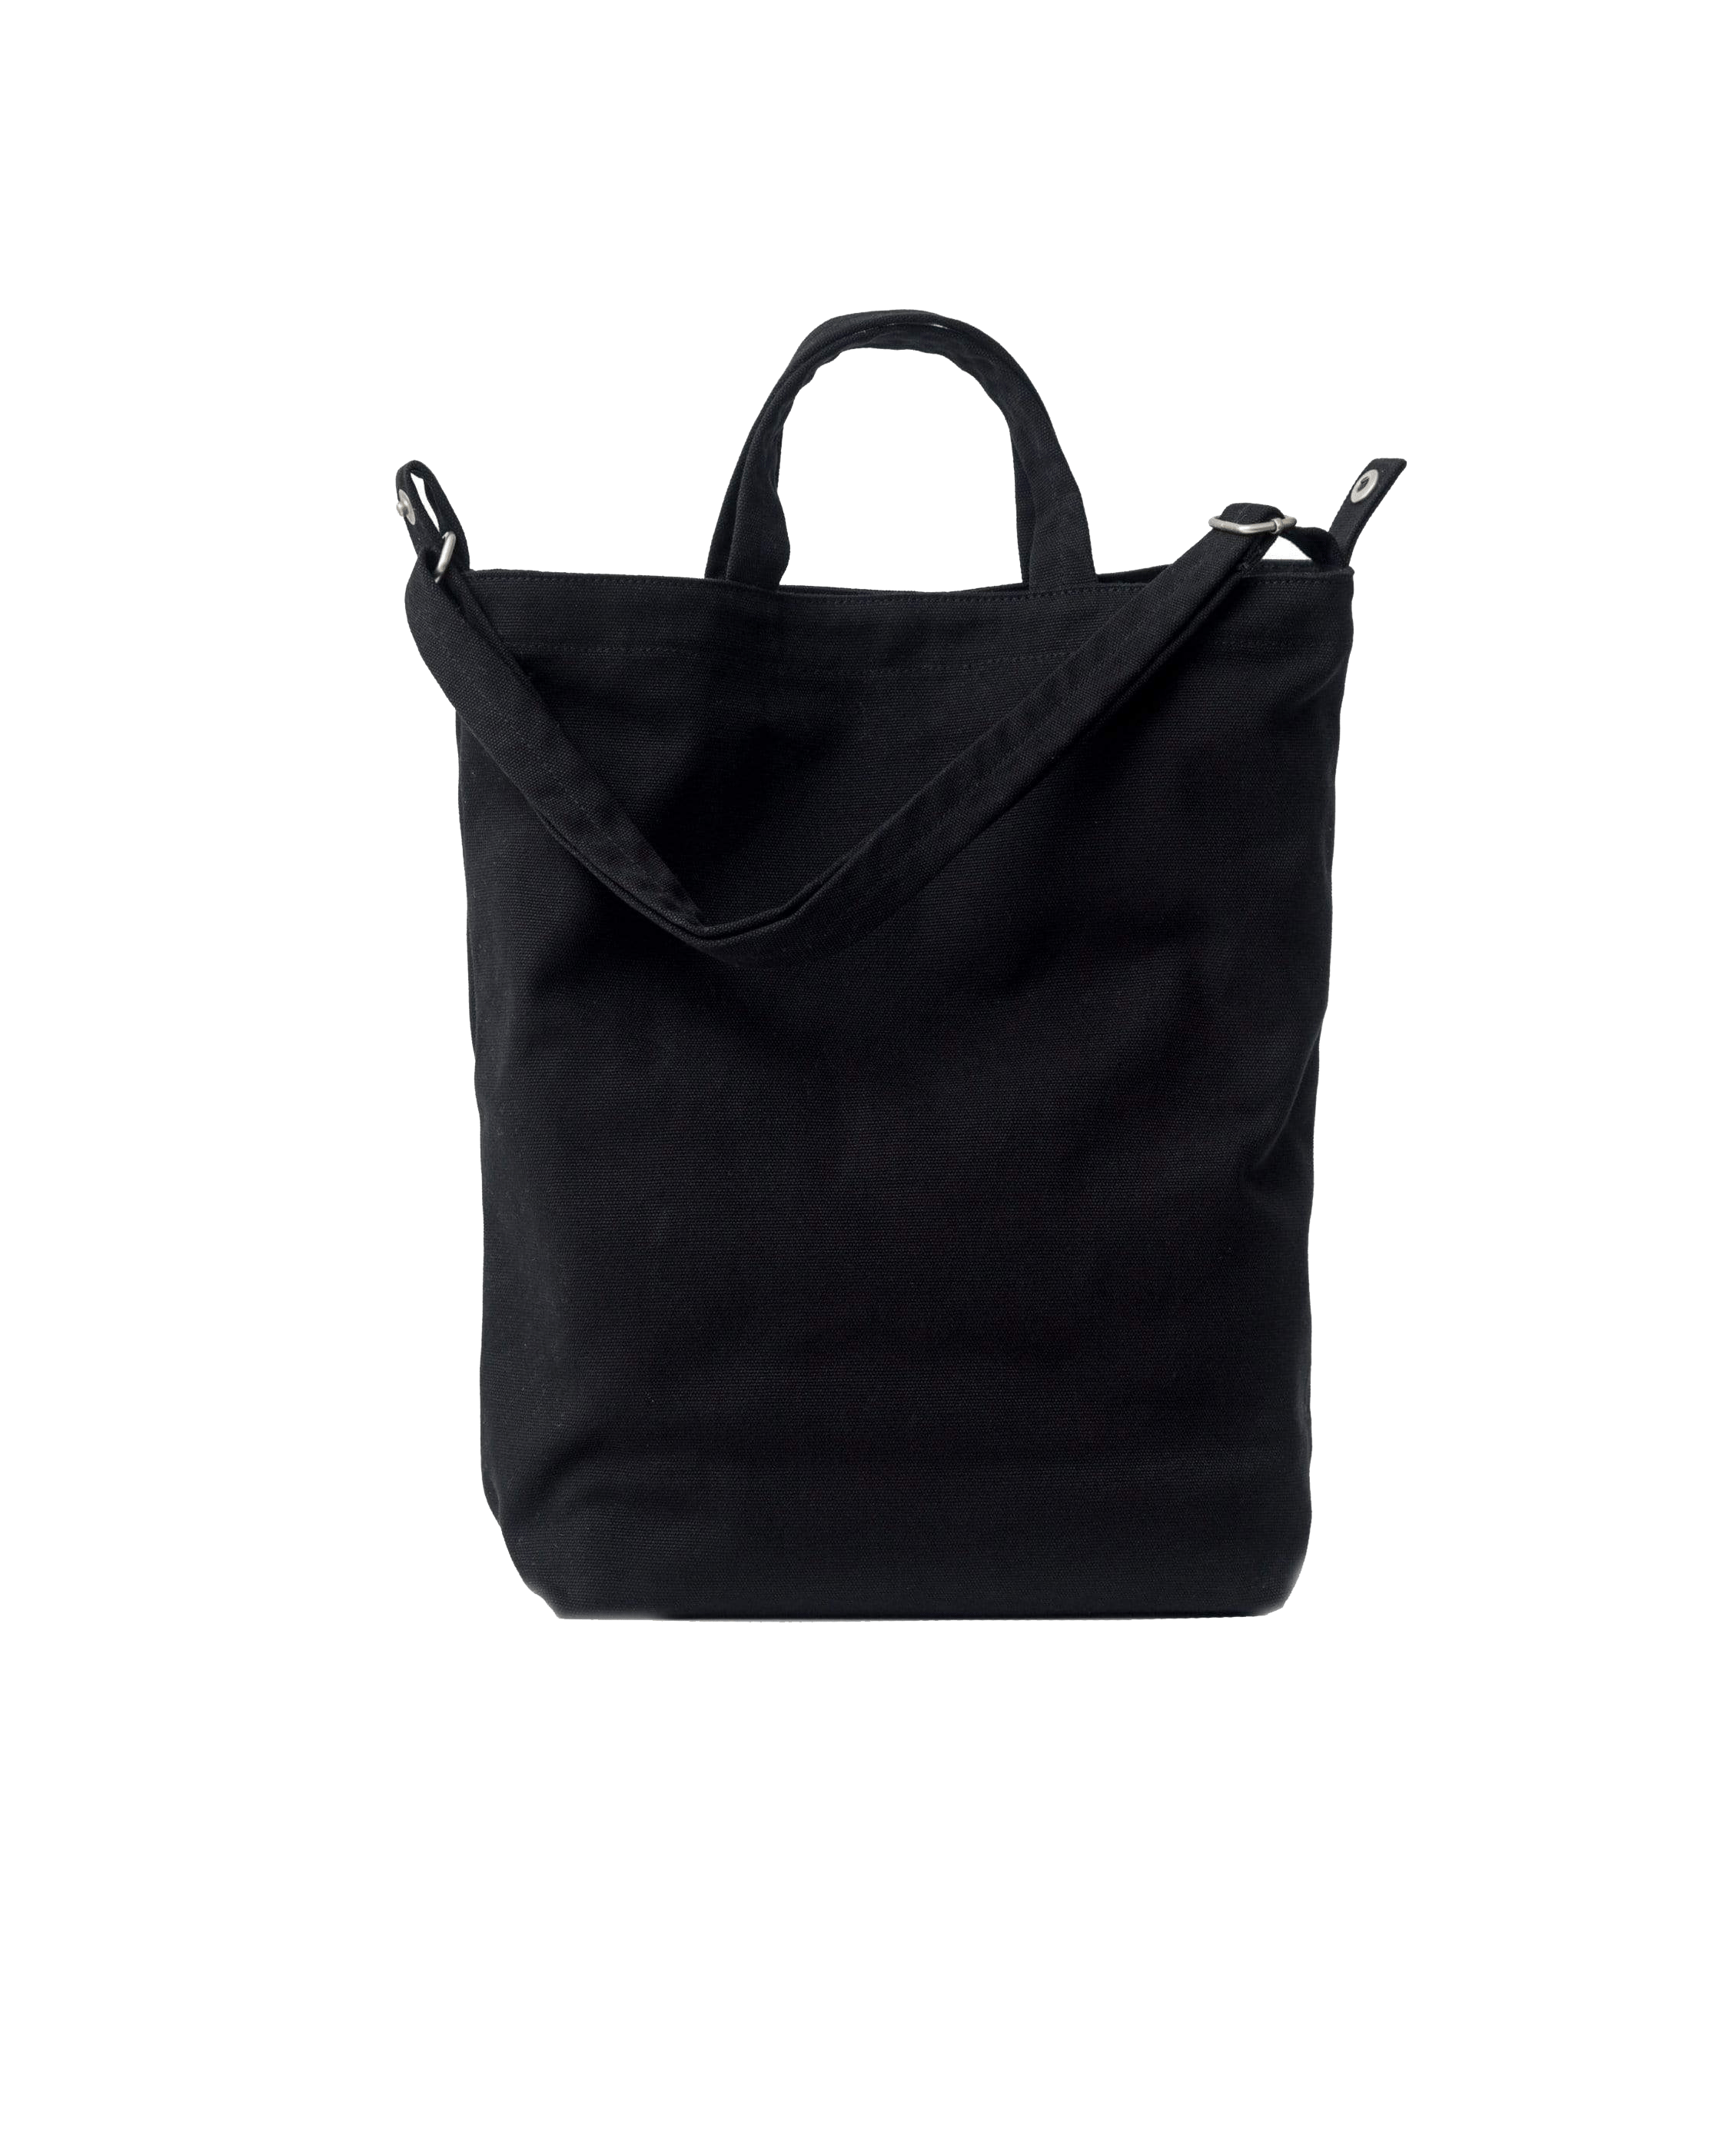 Duck Bag - Canvas Tote | Corporate Gifts | Clove & Twine